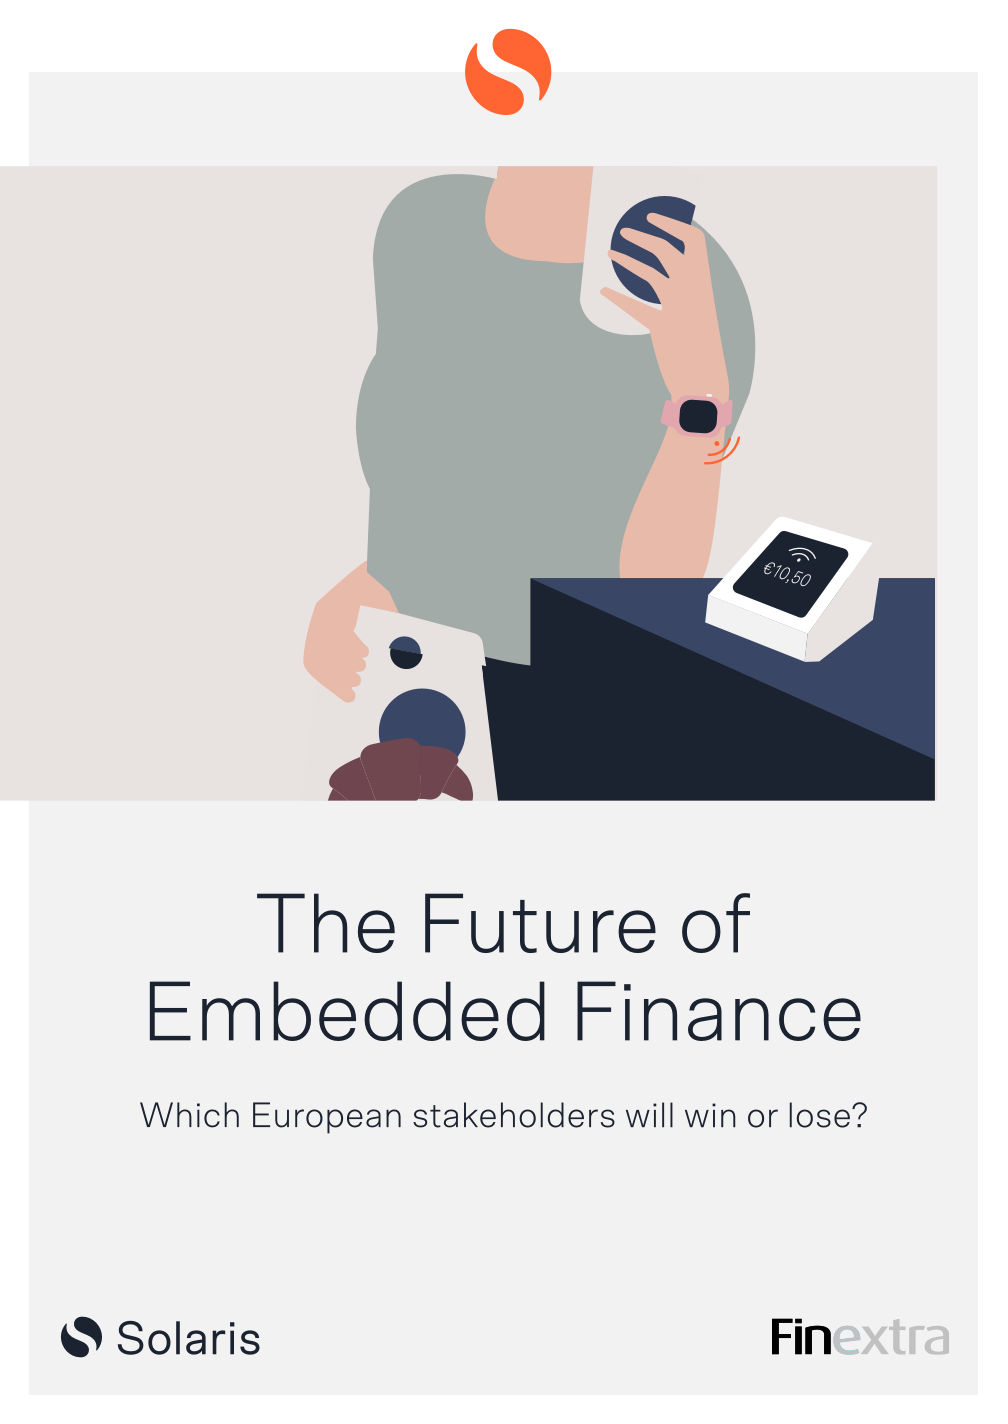 The Future of Embedded Finance